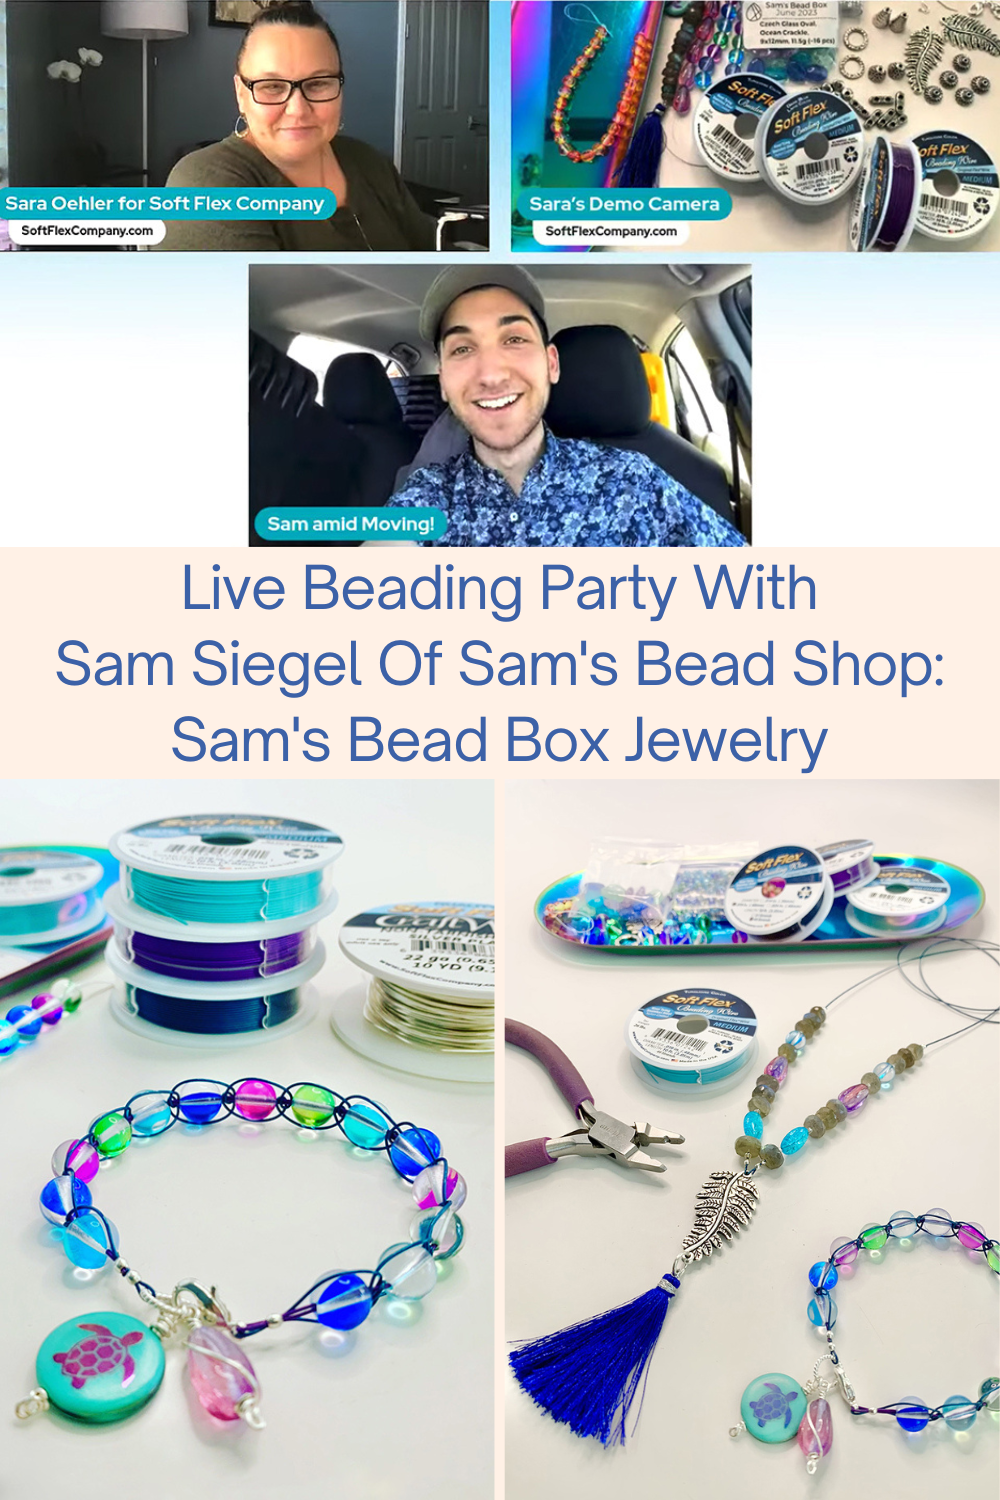 Live Beading Party With Sam Siegel Of Sam's Bead Shop Sam's Bead Box Jewelry Collage